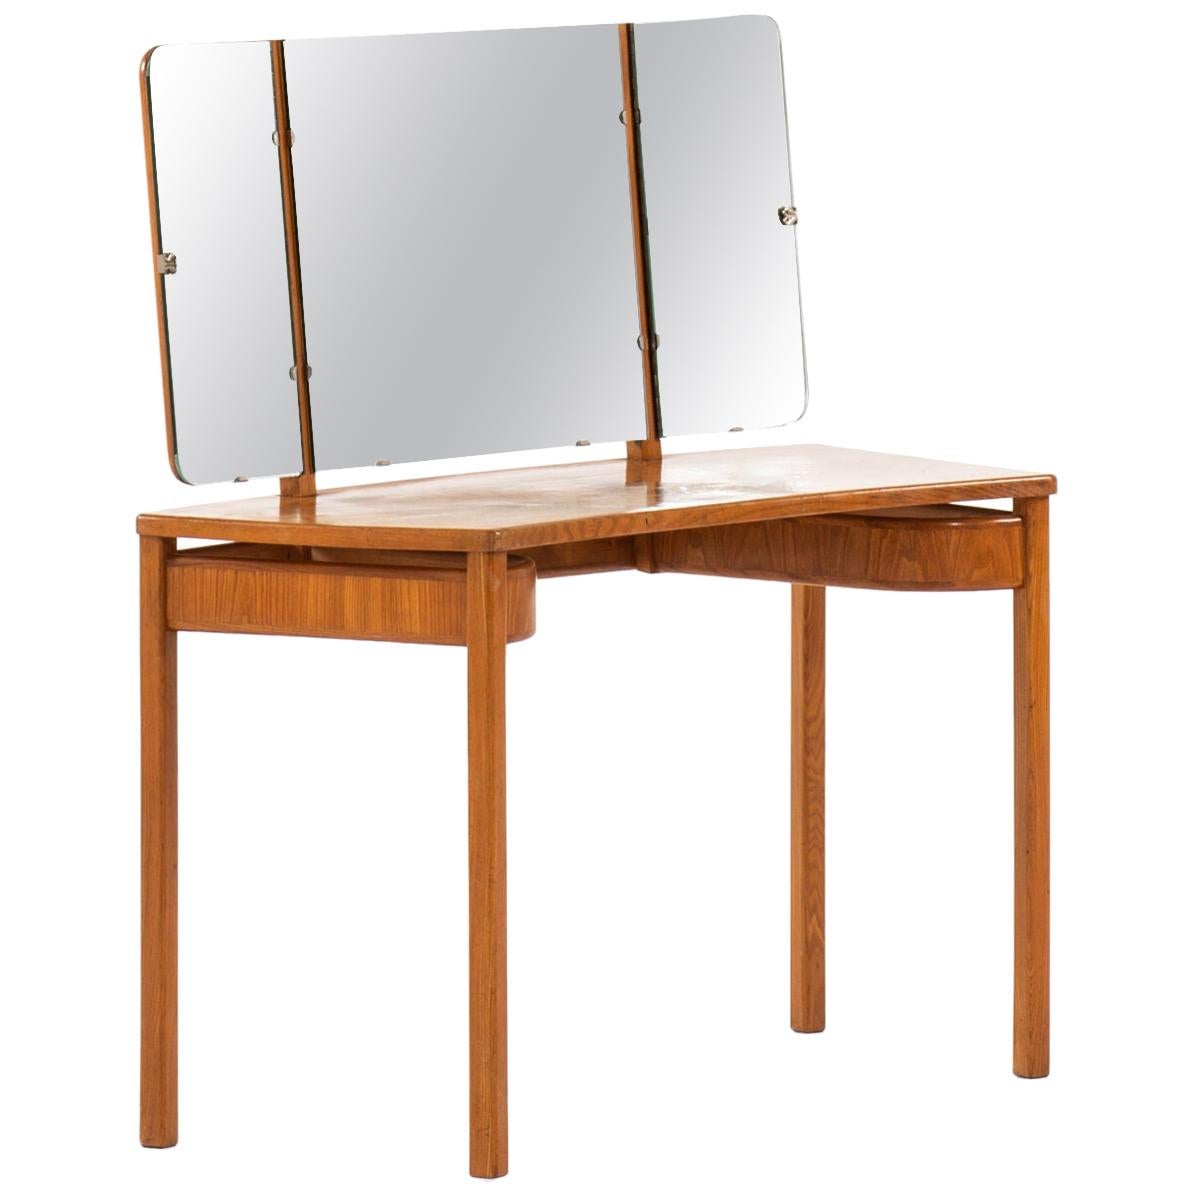 Carl-Johan Boman Vanity Produced by Boman Oy in Finland For Sale